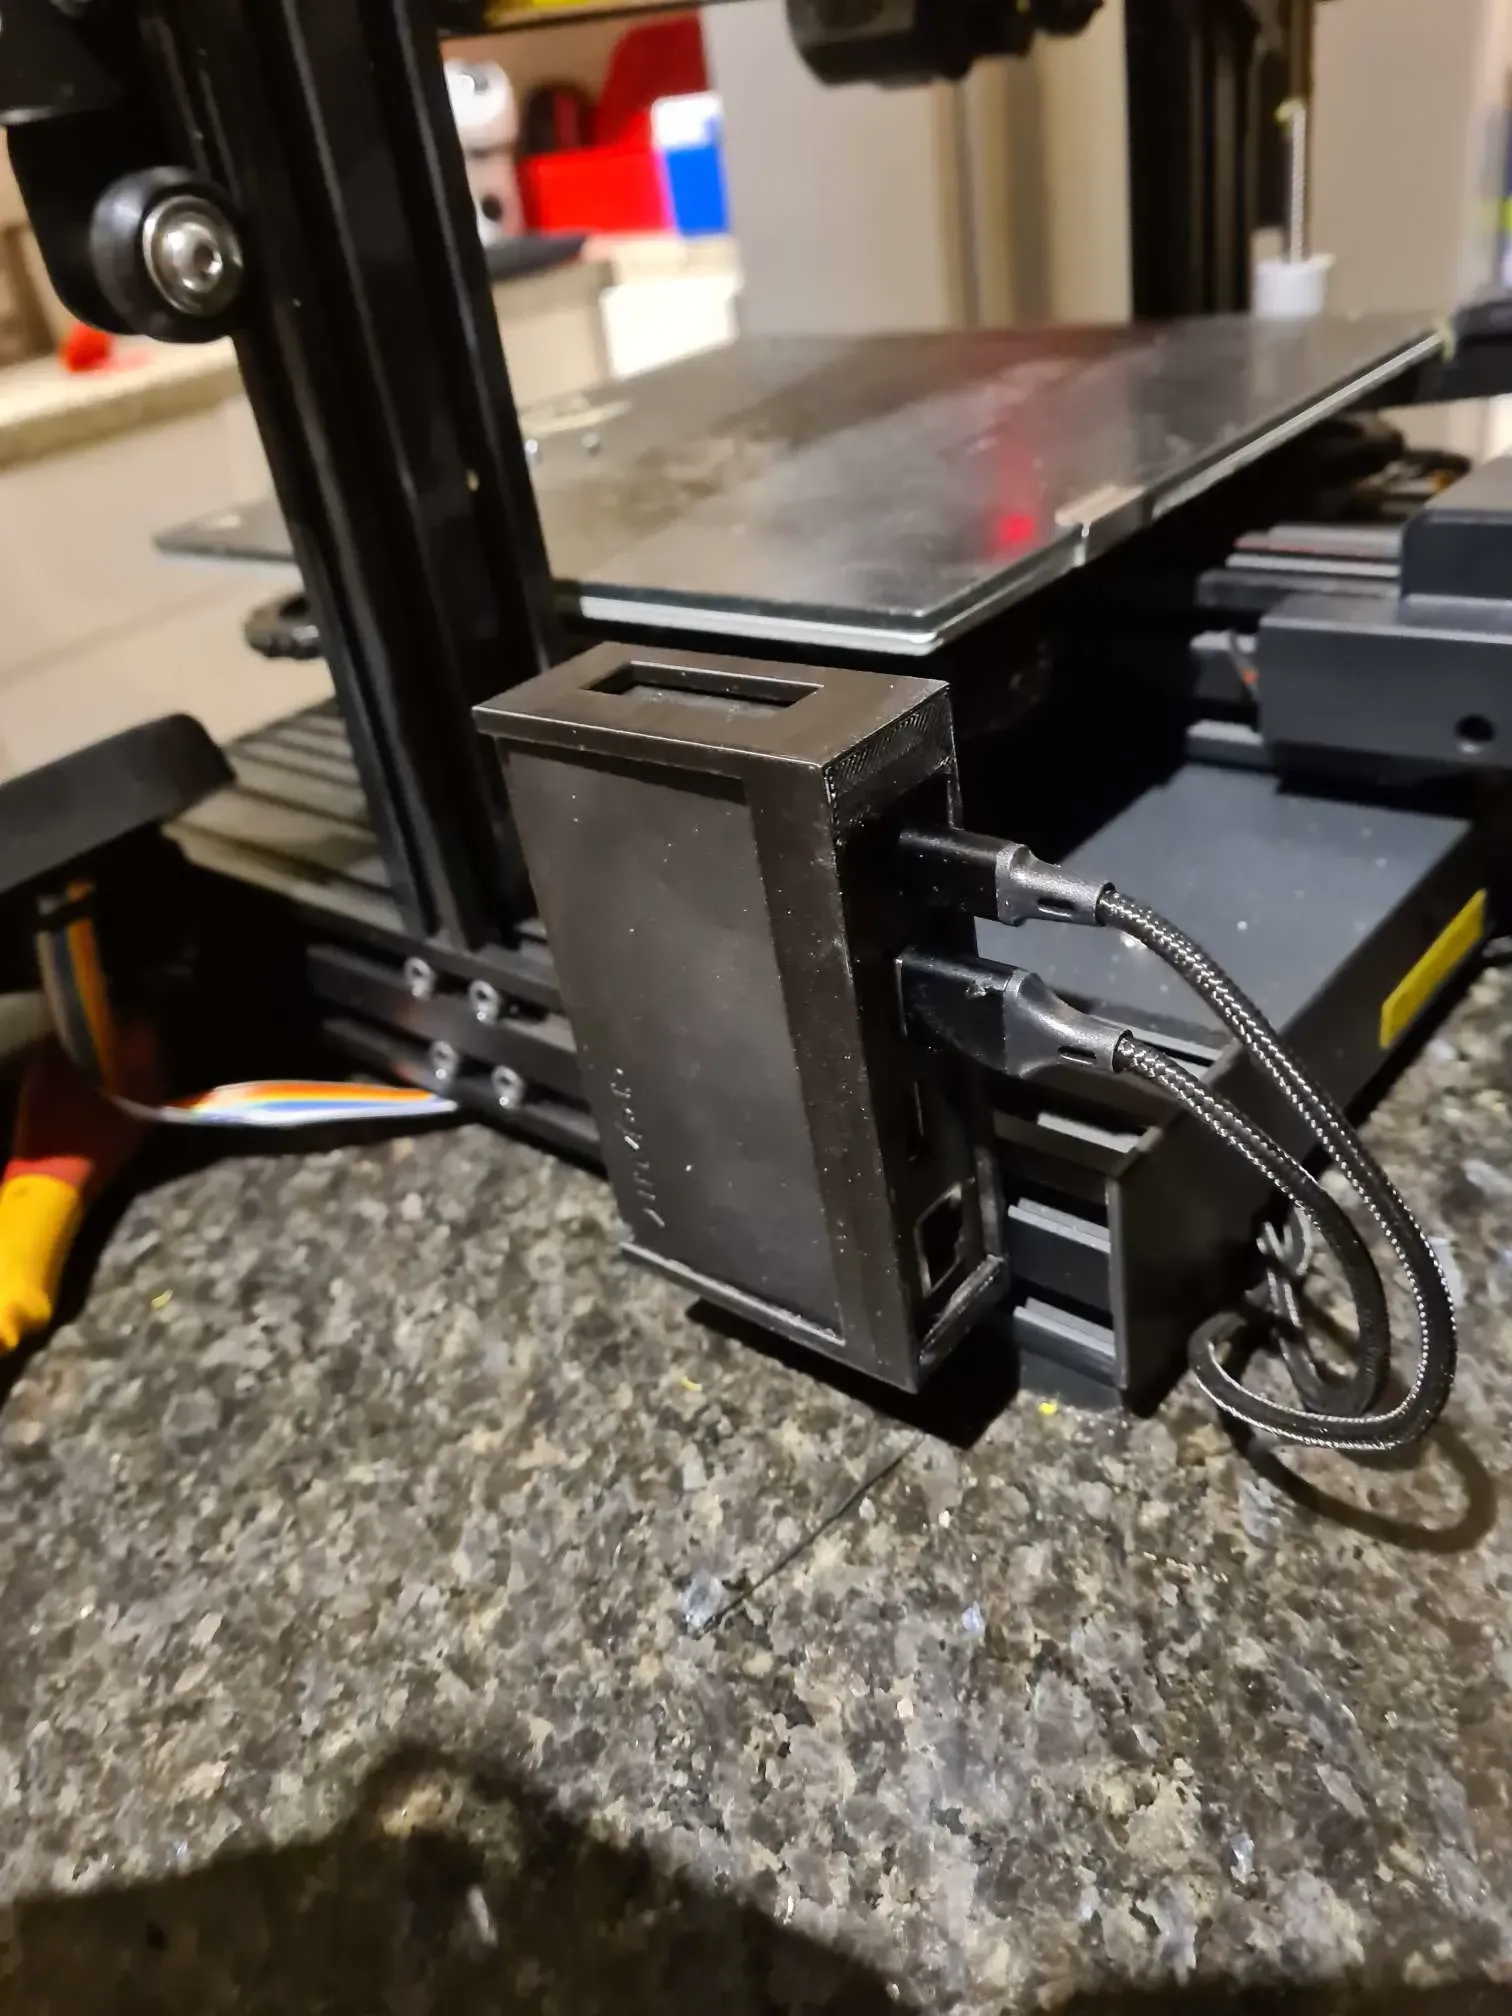 Simple snap-in holder for Creality wifi box